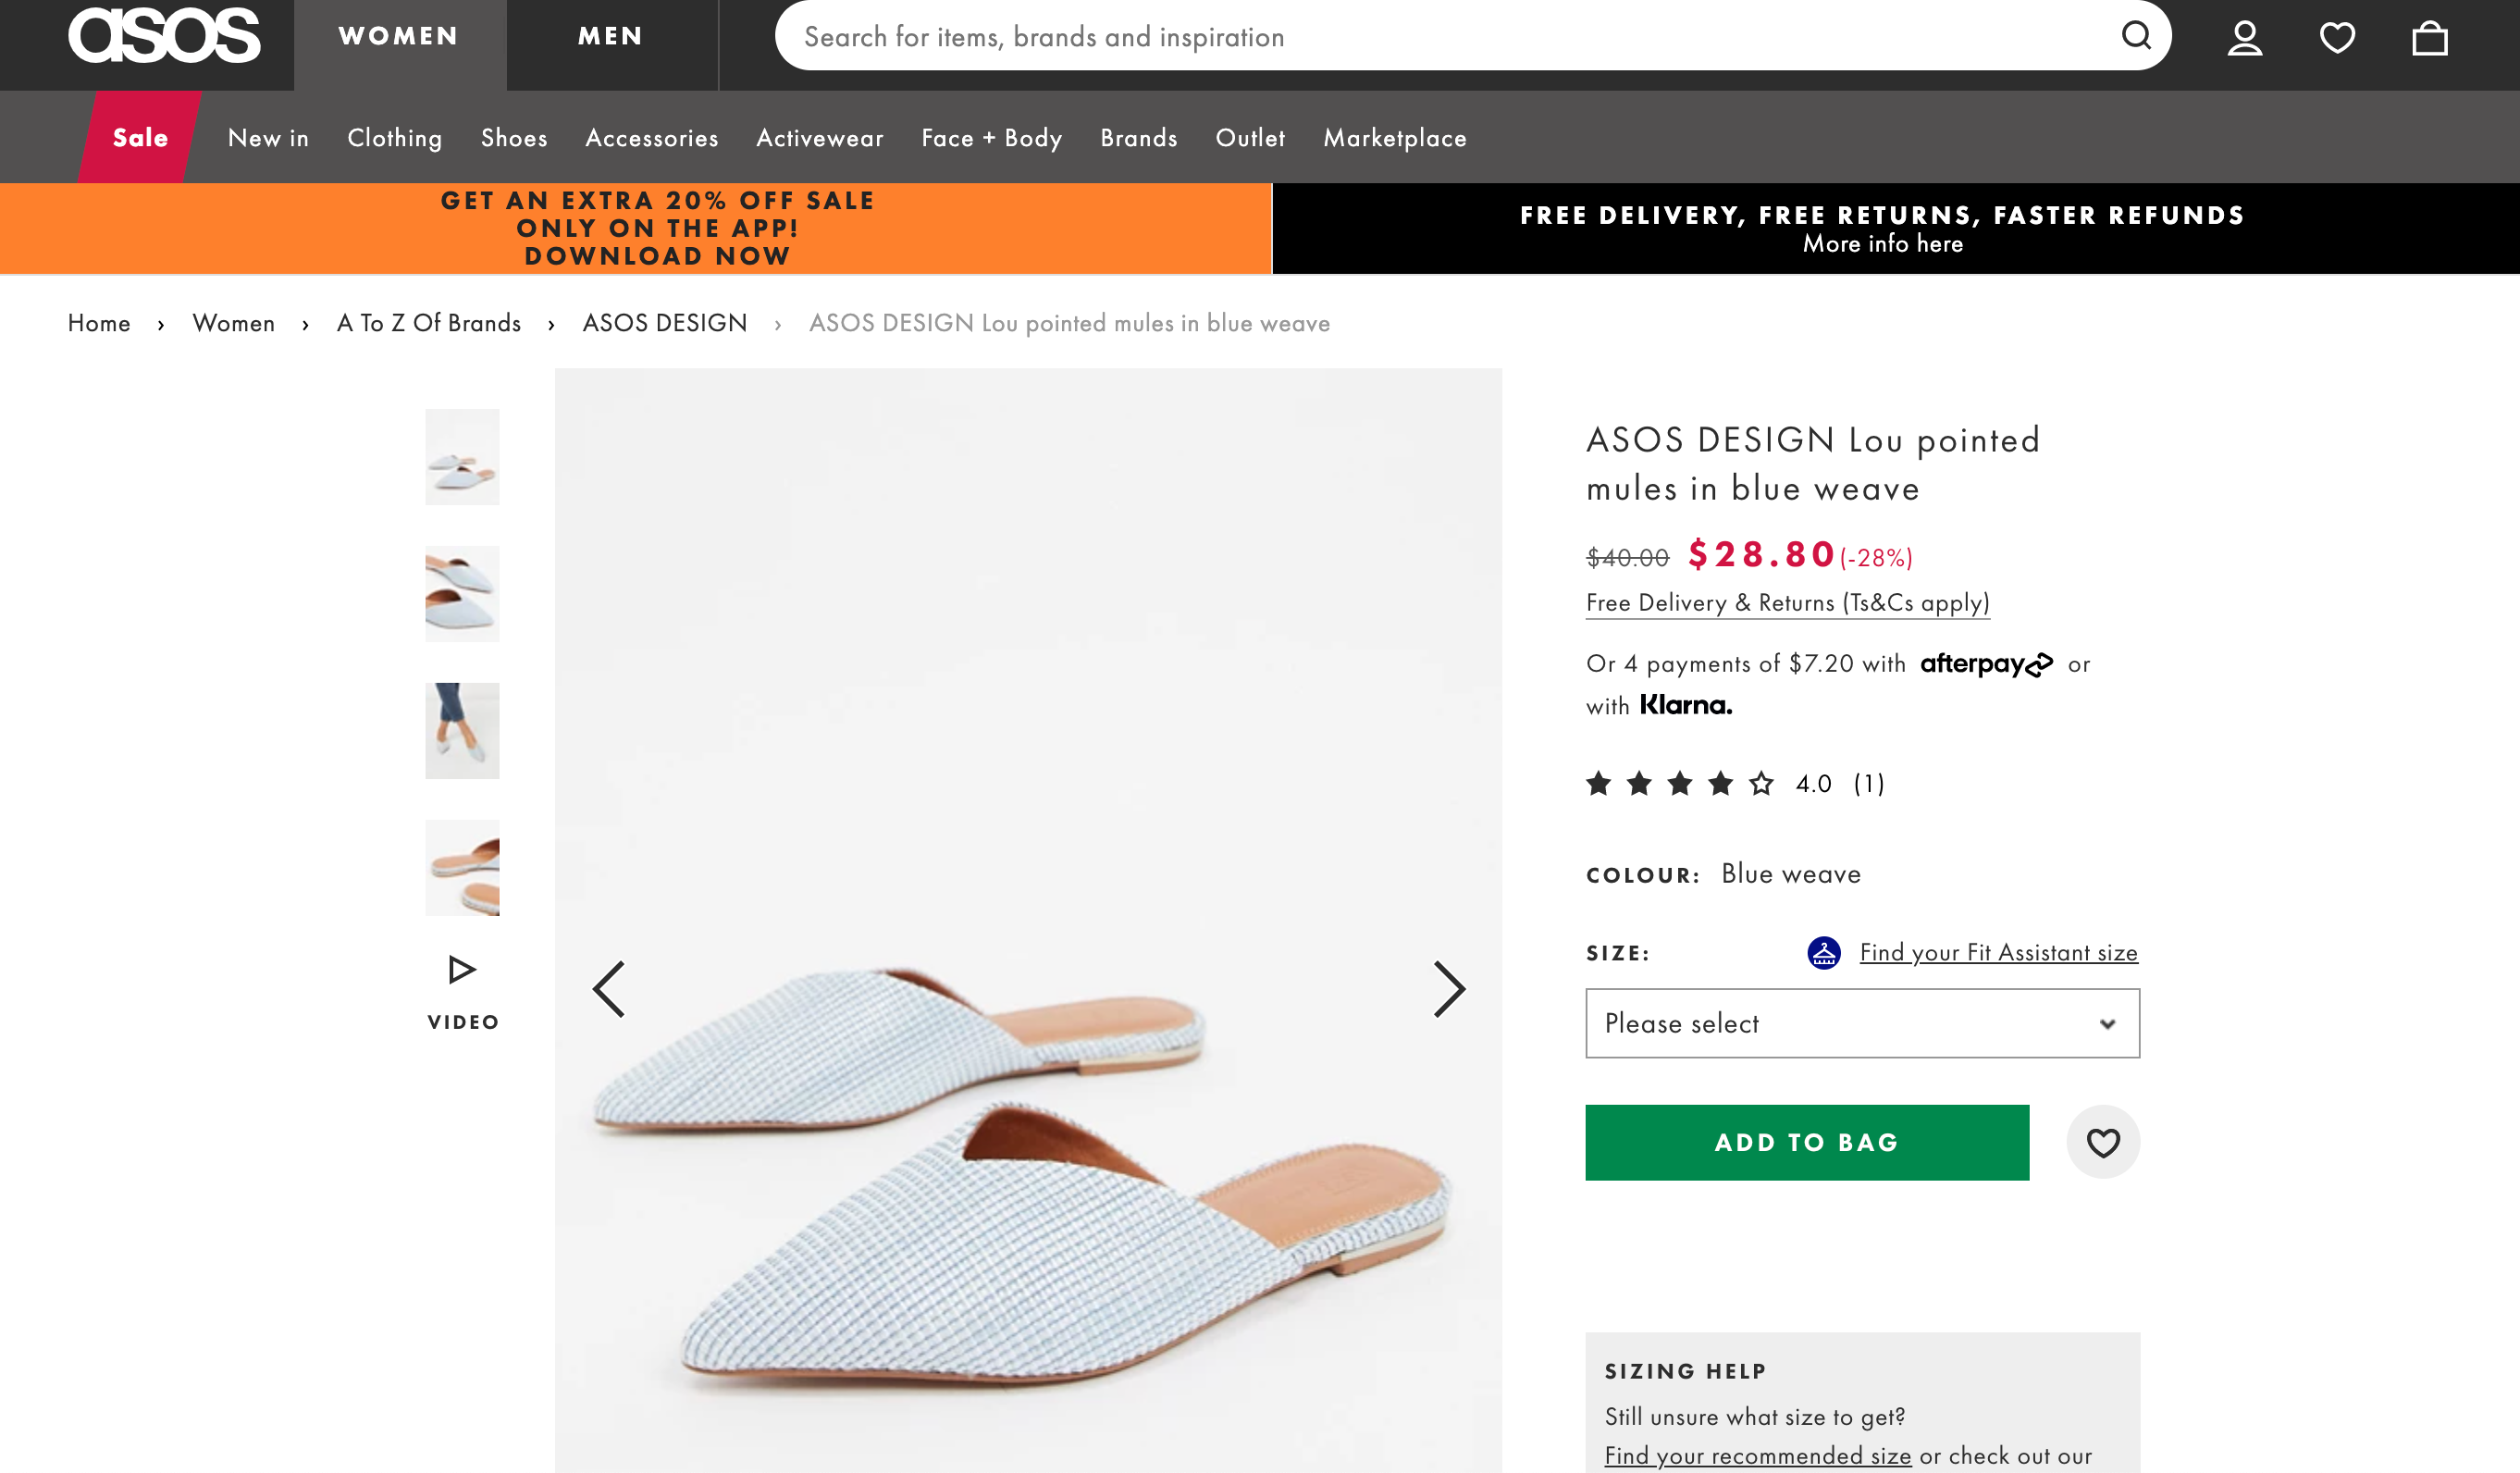 How to Boost Online Sales with Great Product Images